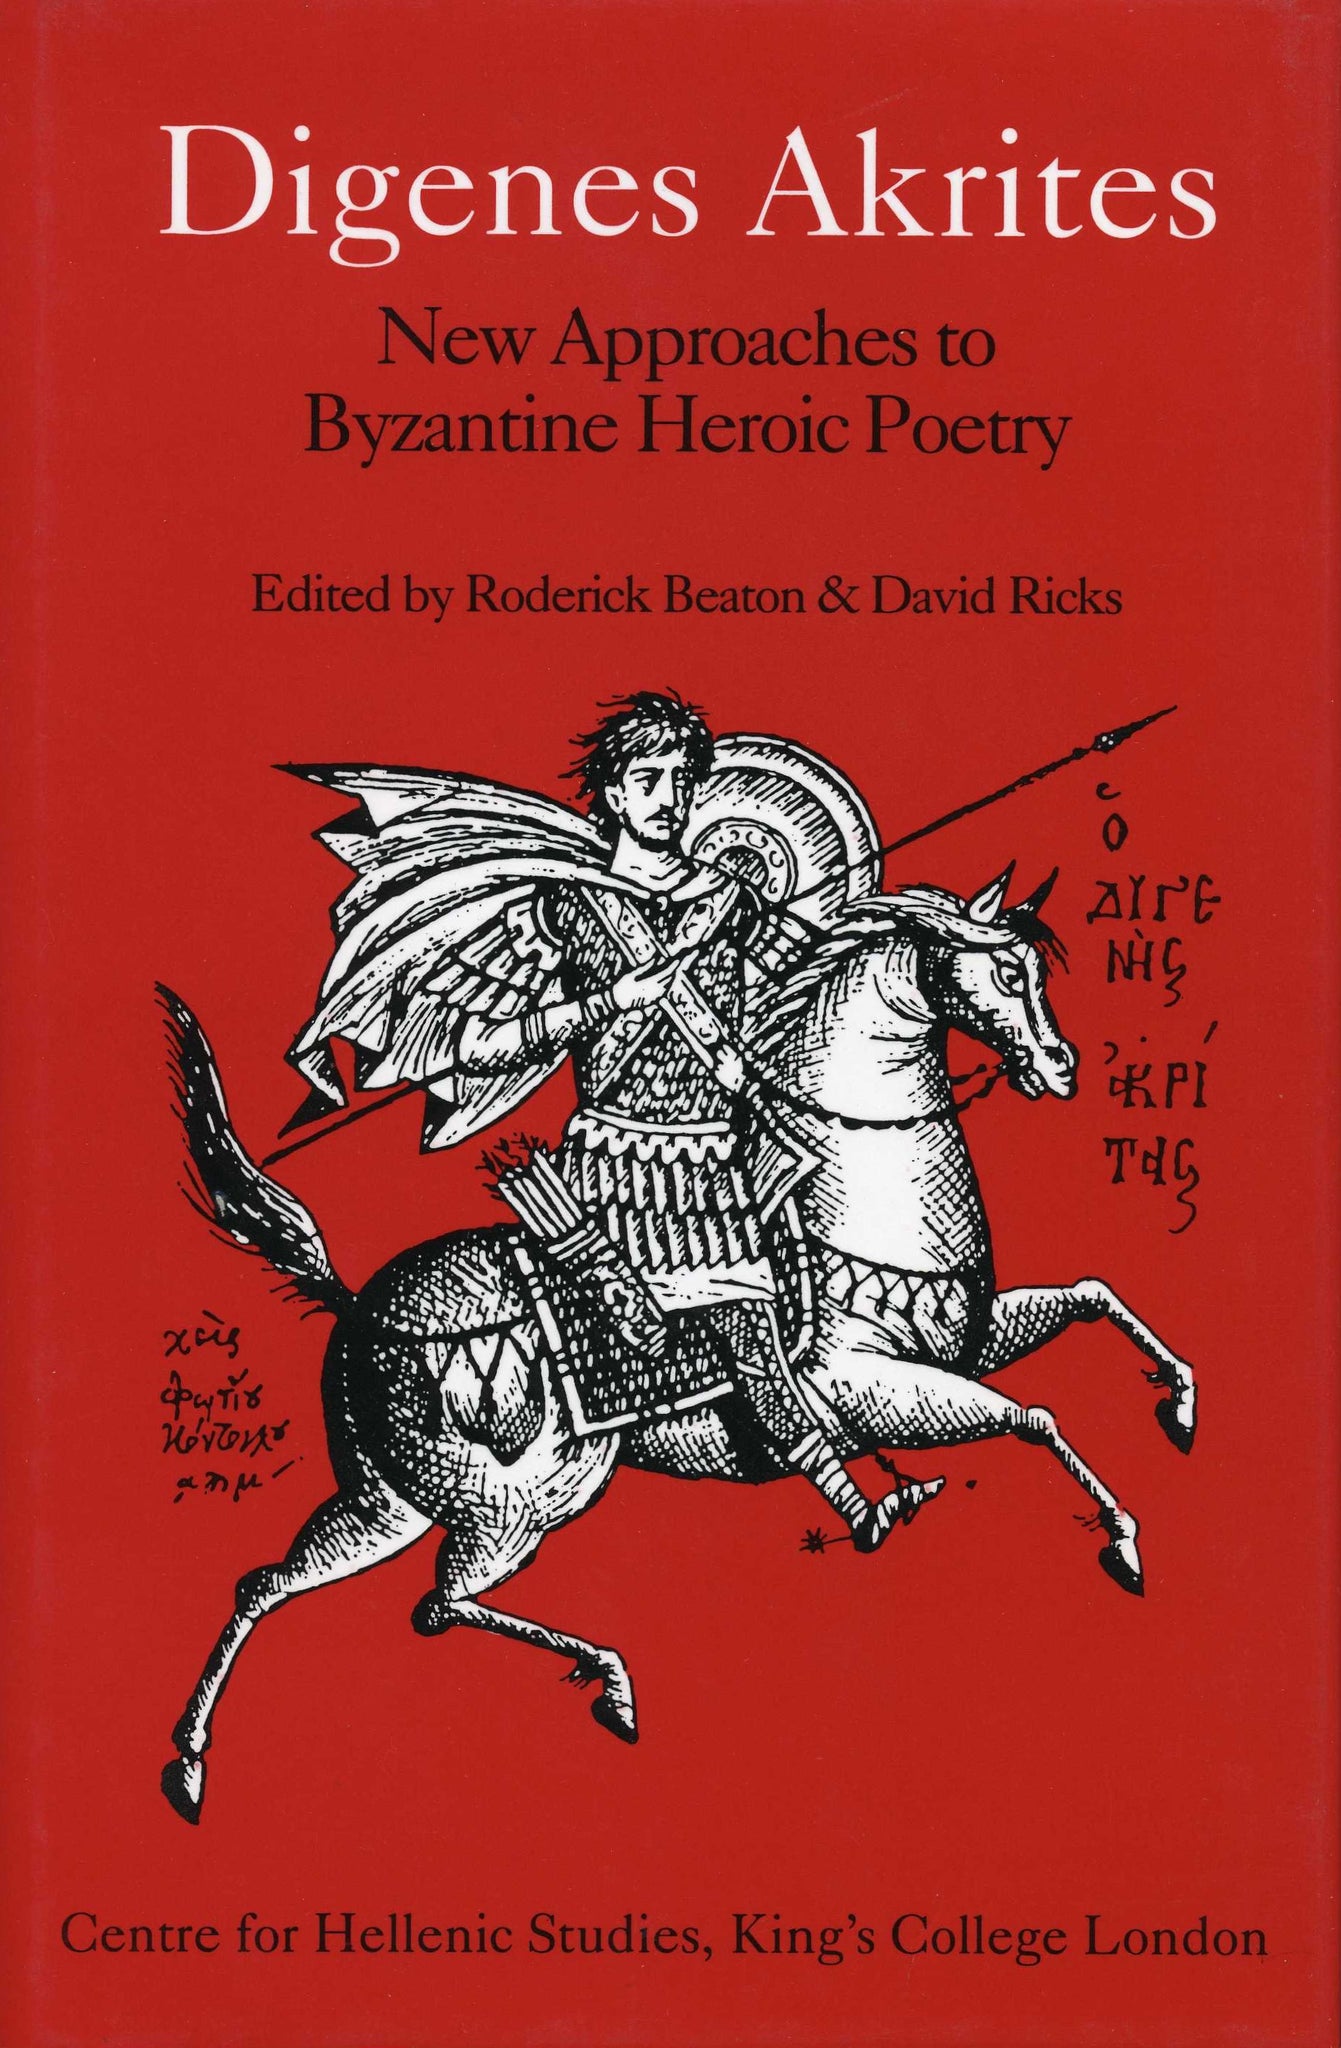 DIGENES AKRITES: NEW APPROACHES TO BYZANTINE HEROIC POETRY